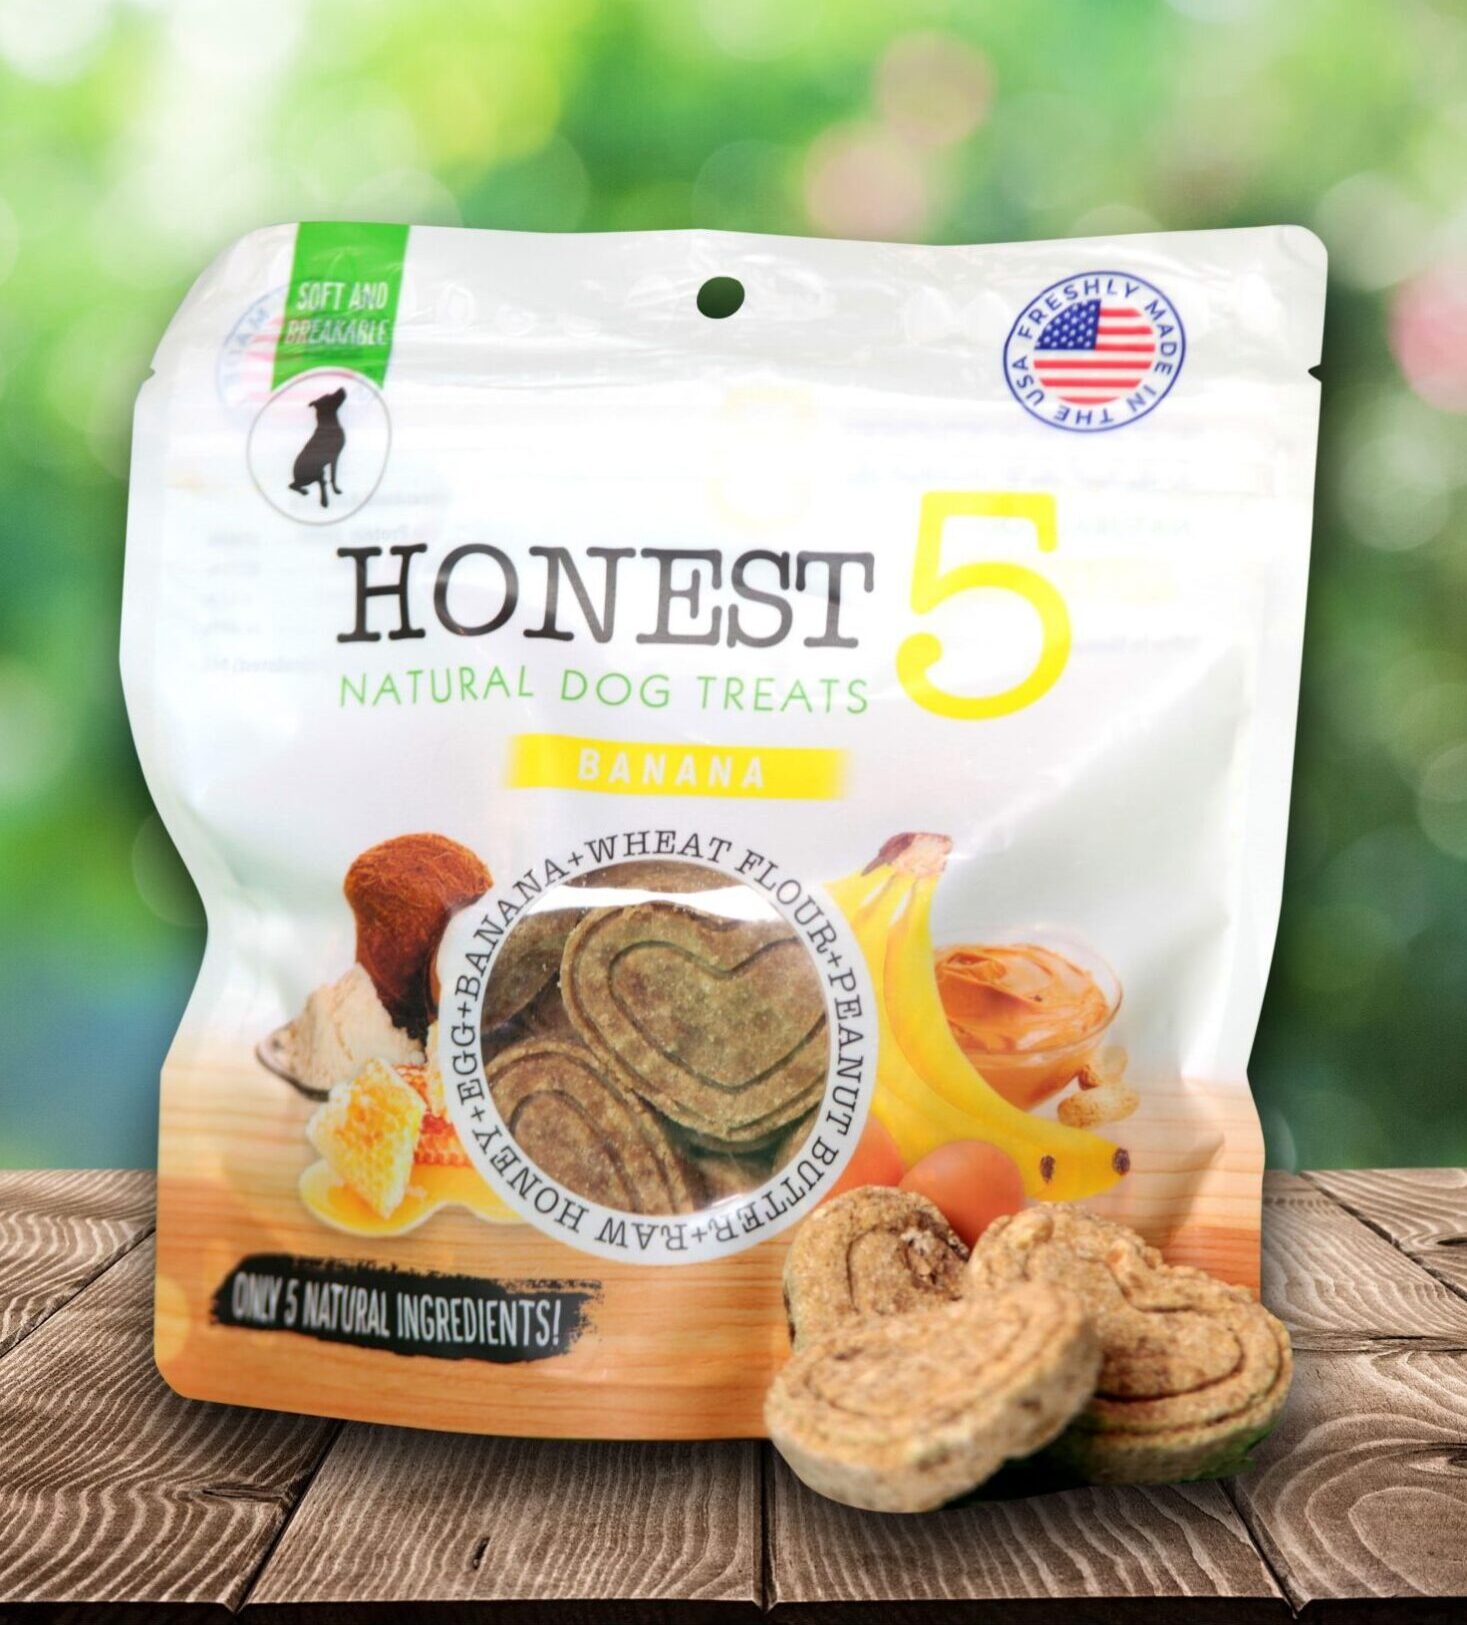 HONEST5 Launches 100% Natural Food and Treats for Dogs that are also Freshly Made in the USA